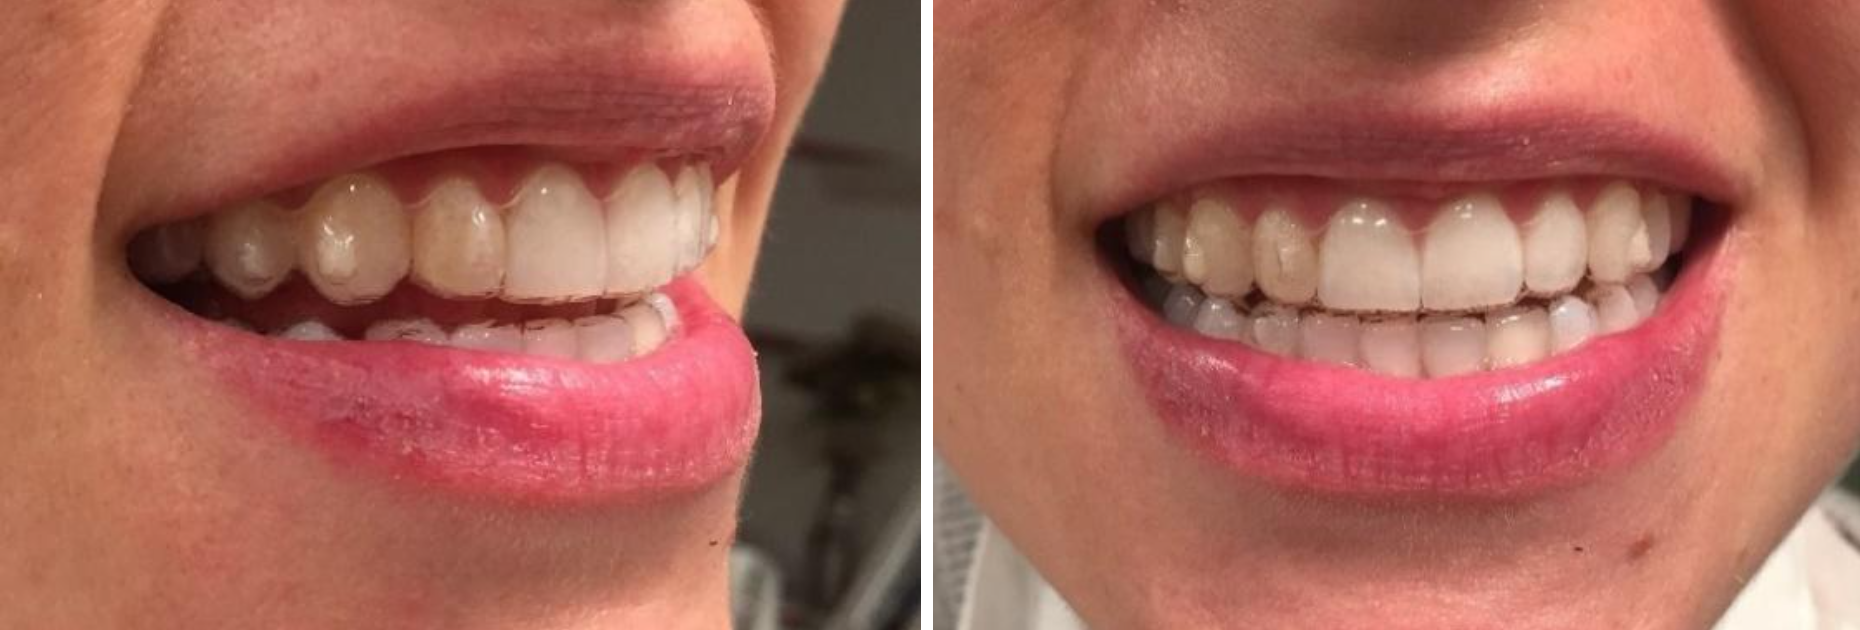 Invisalign for teeth straightening and alignment at SHDC